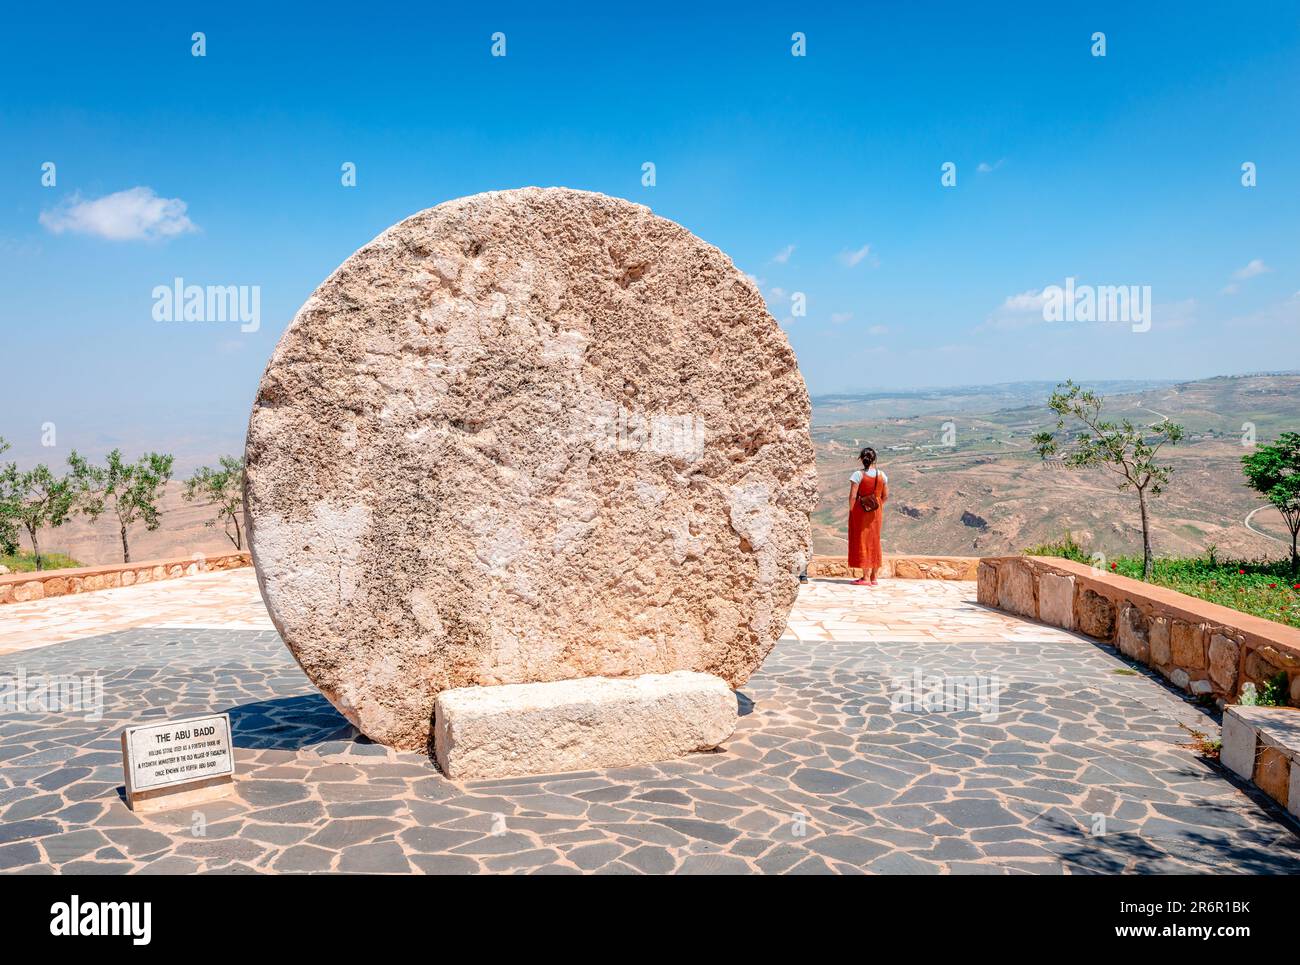 The Abu Badd, a rolling stone used as a fortified door of a Byzantine monastery in the old village of Faisaliyah. Unidentified woman enjoying the view Stock Photo